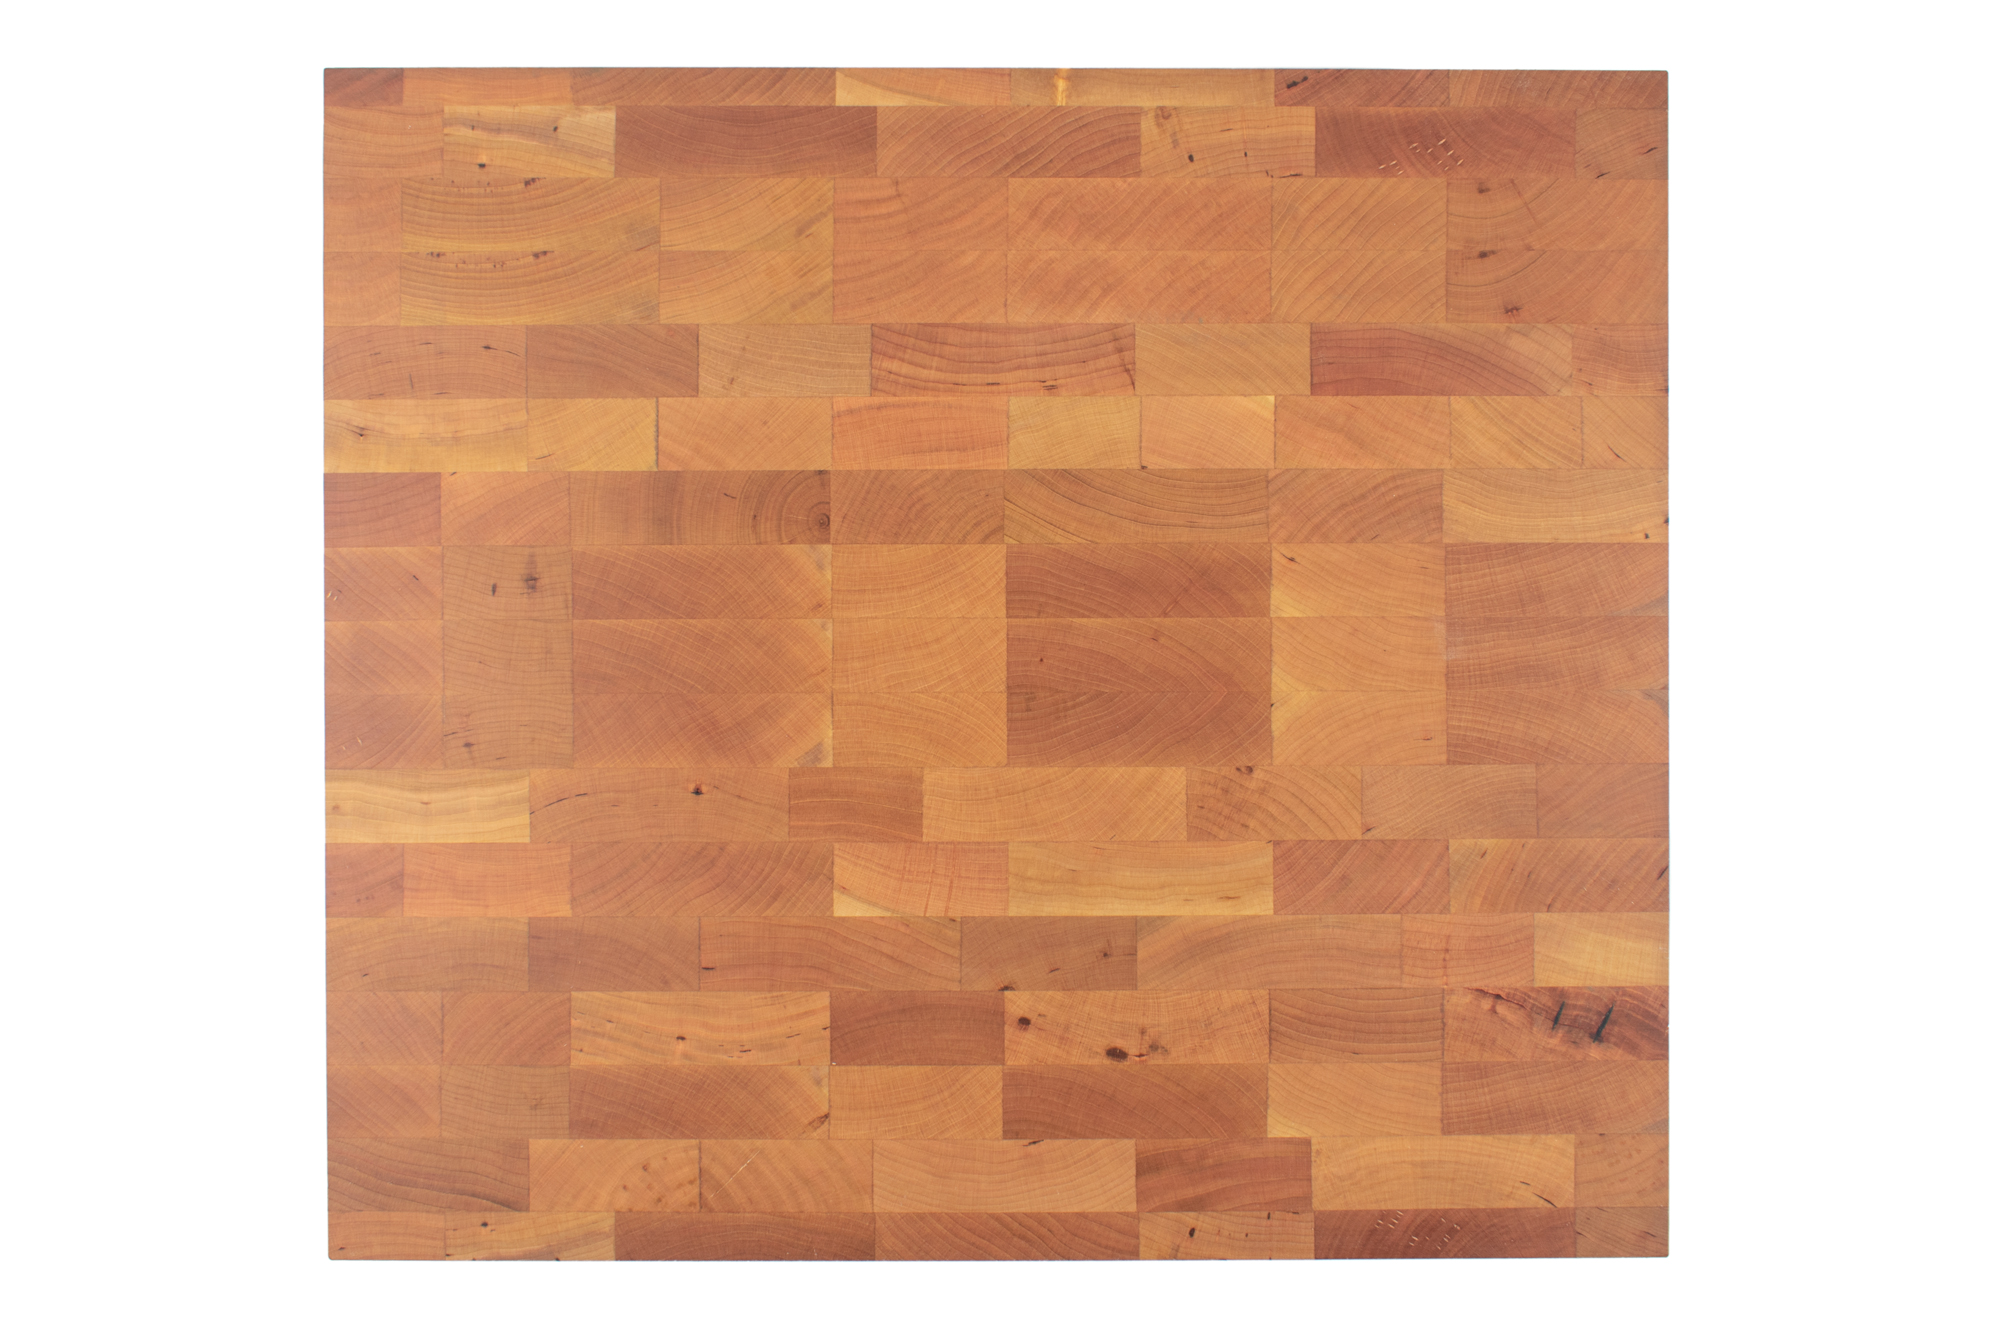 Cherry Large End grain butcher block with side handle indents 